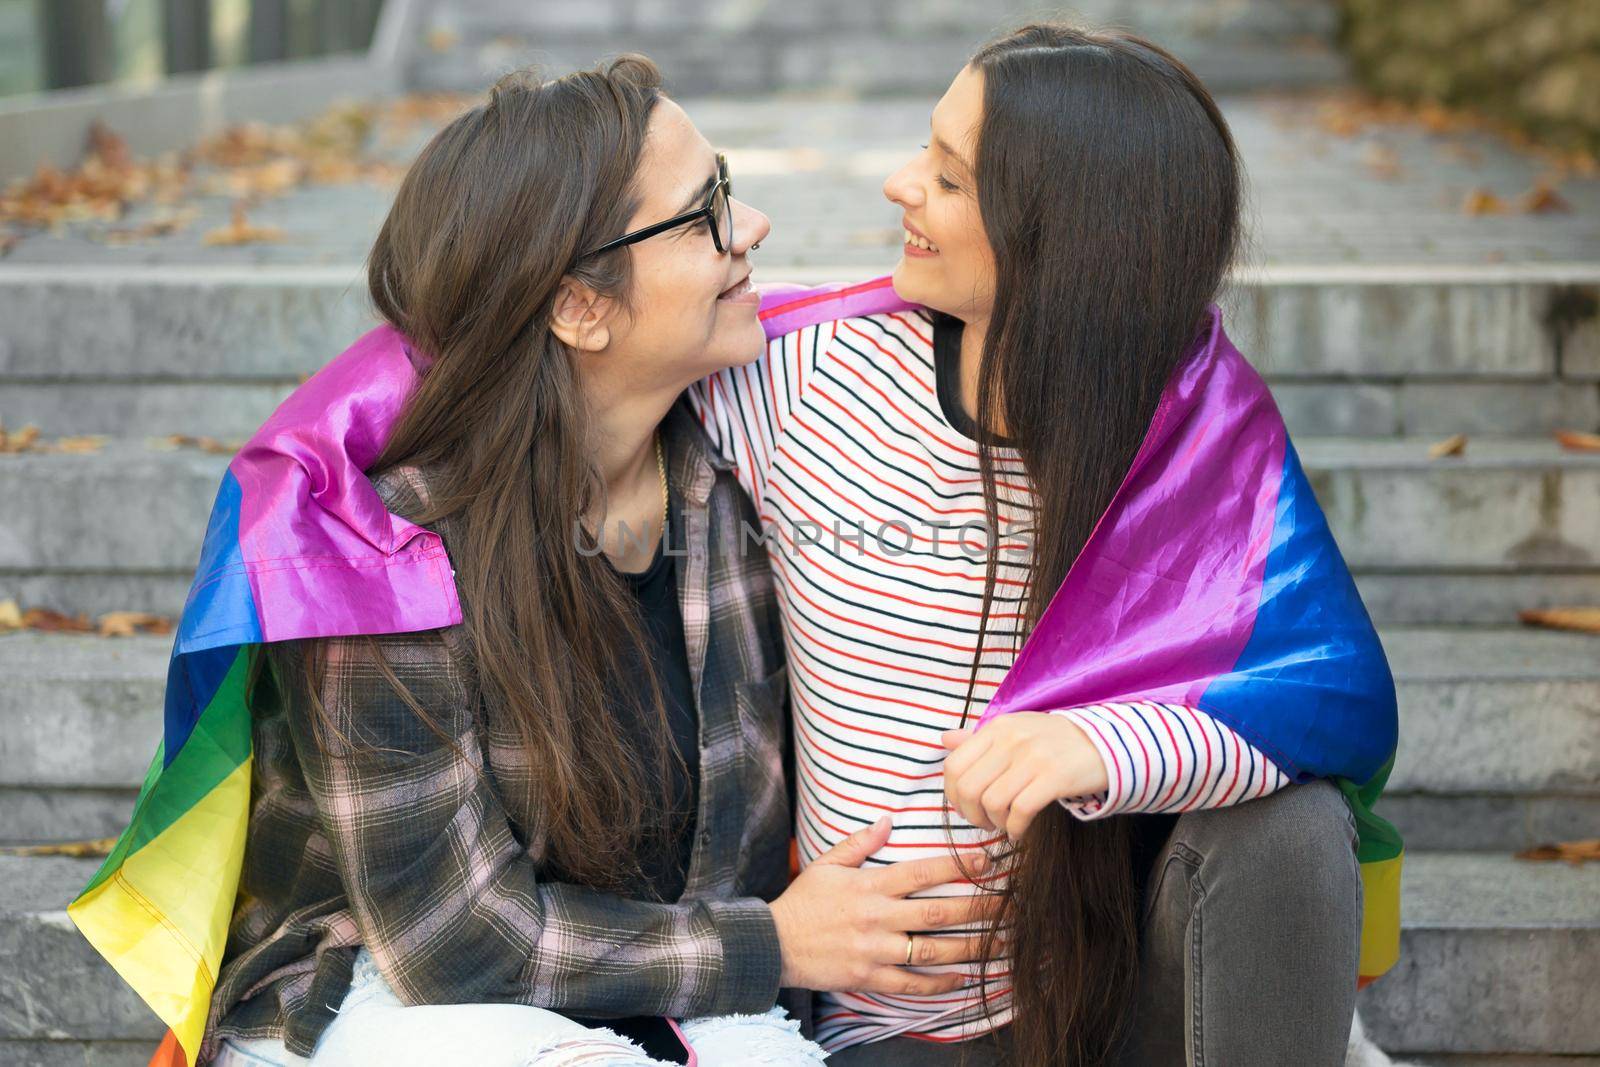 Pregnant Lesbian couple, sitting on stairs hugging with rainbow flag at urban scenery. High quality photo.